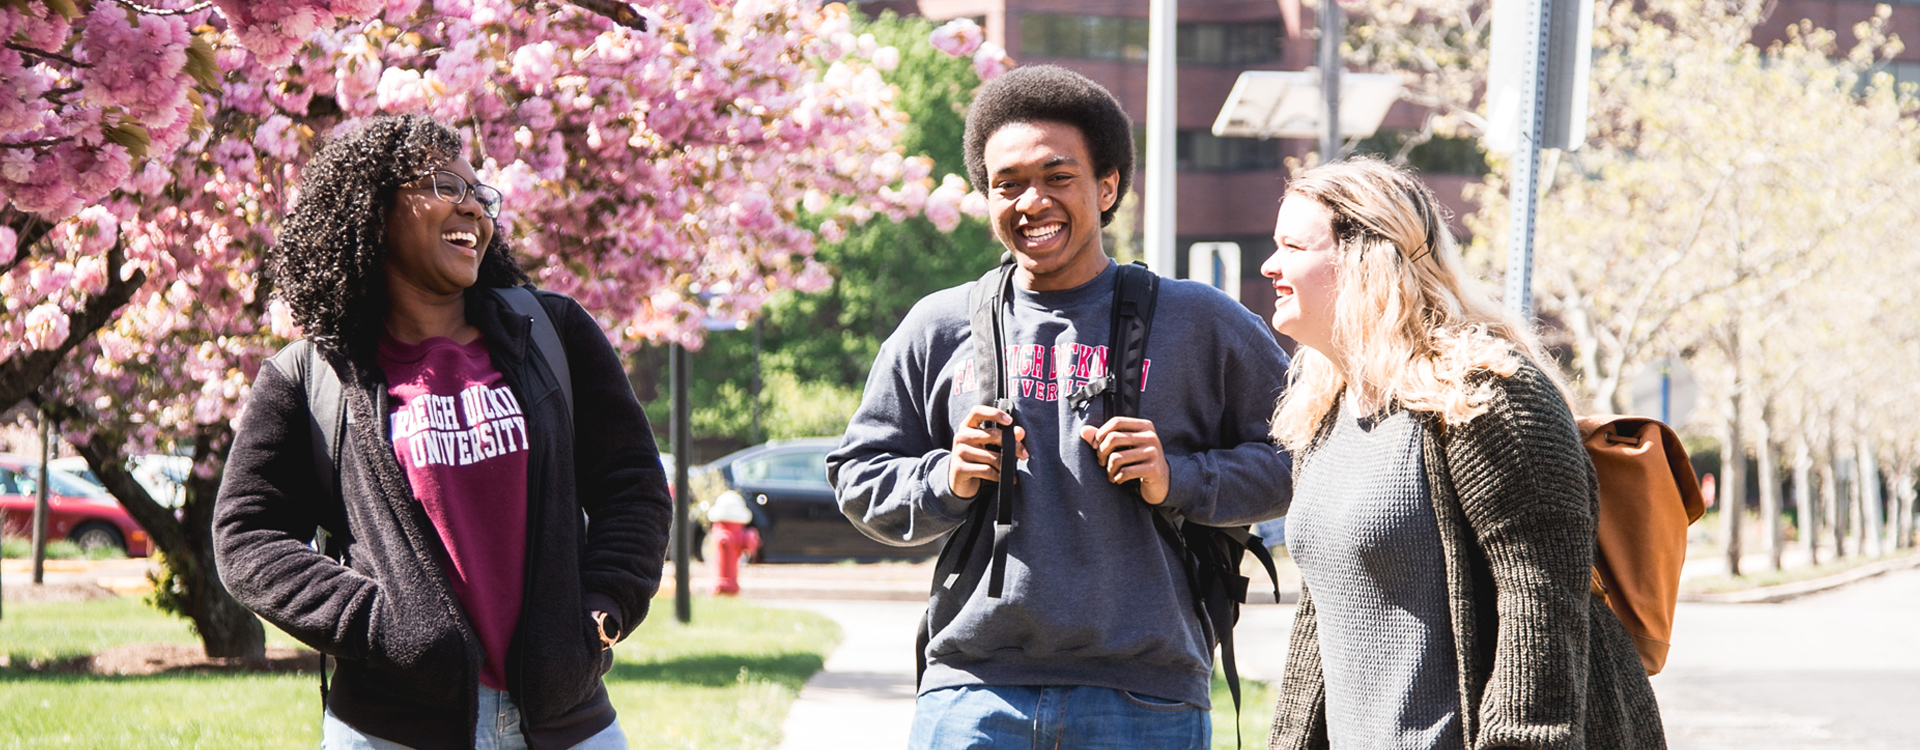 FDU students smiling on campus